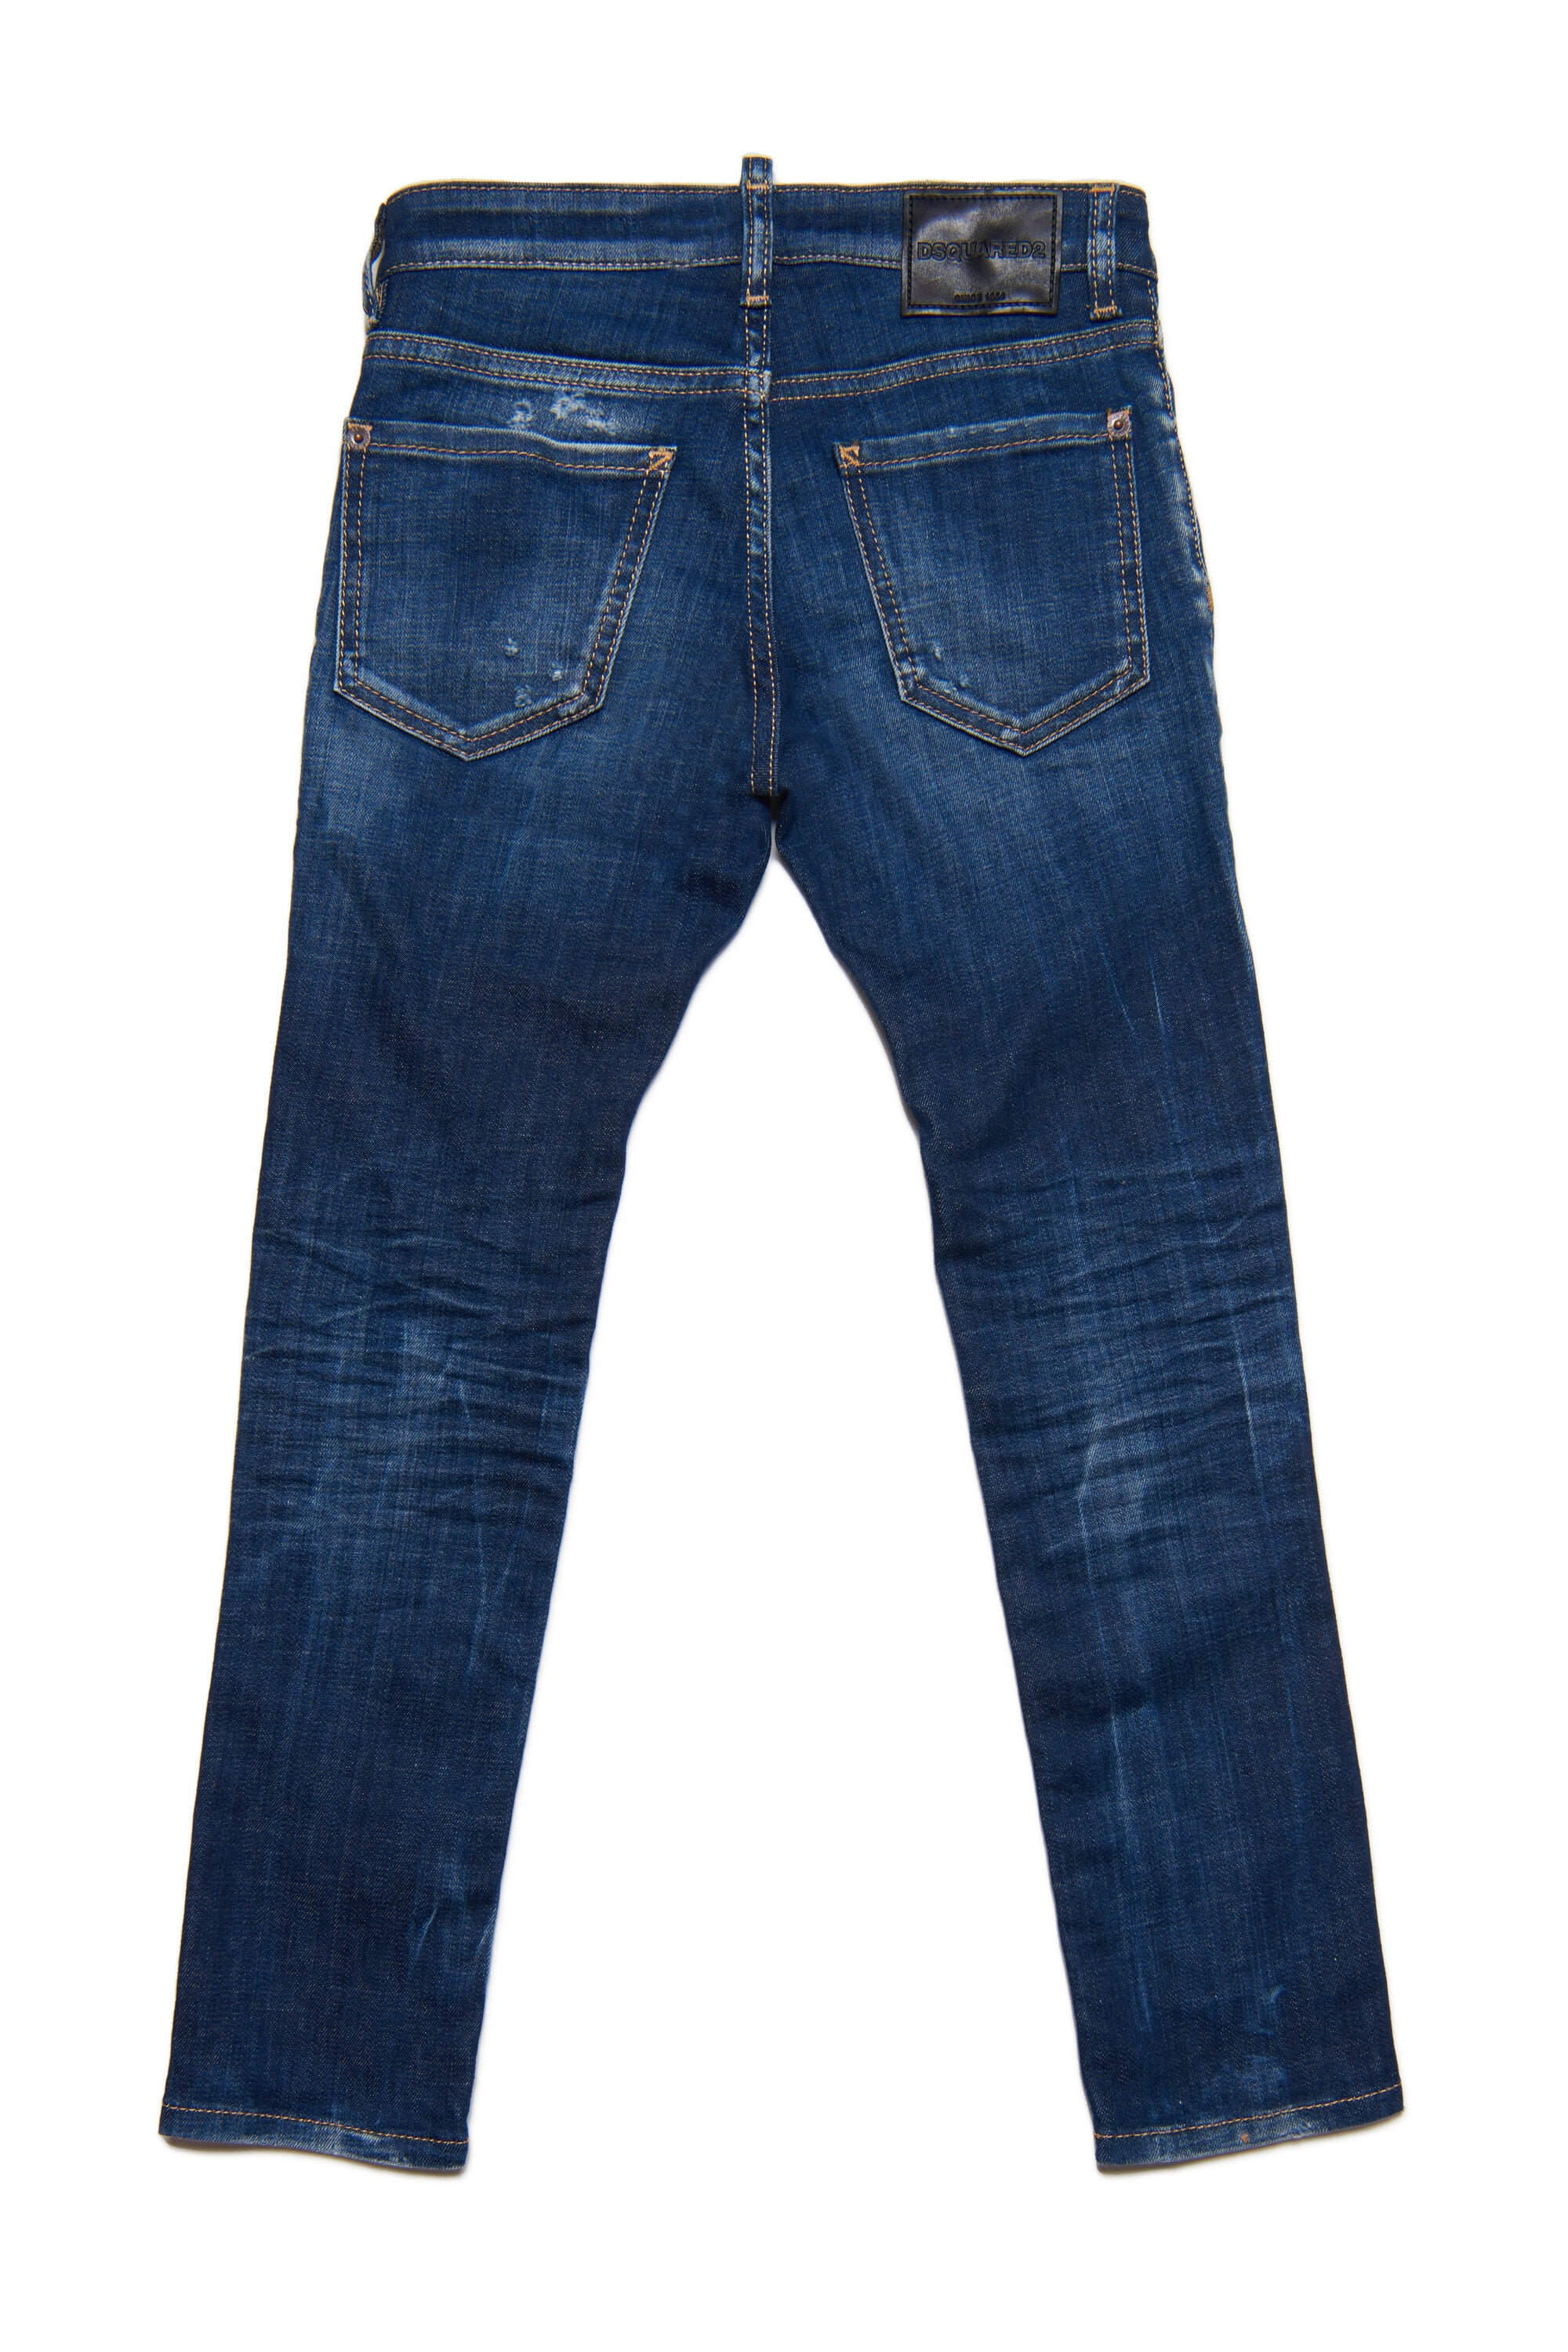 Dsquared2 logo-print Ripped Tapered Jeans - Farfetch